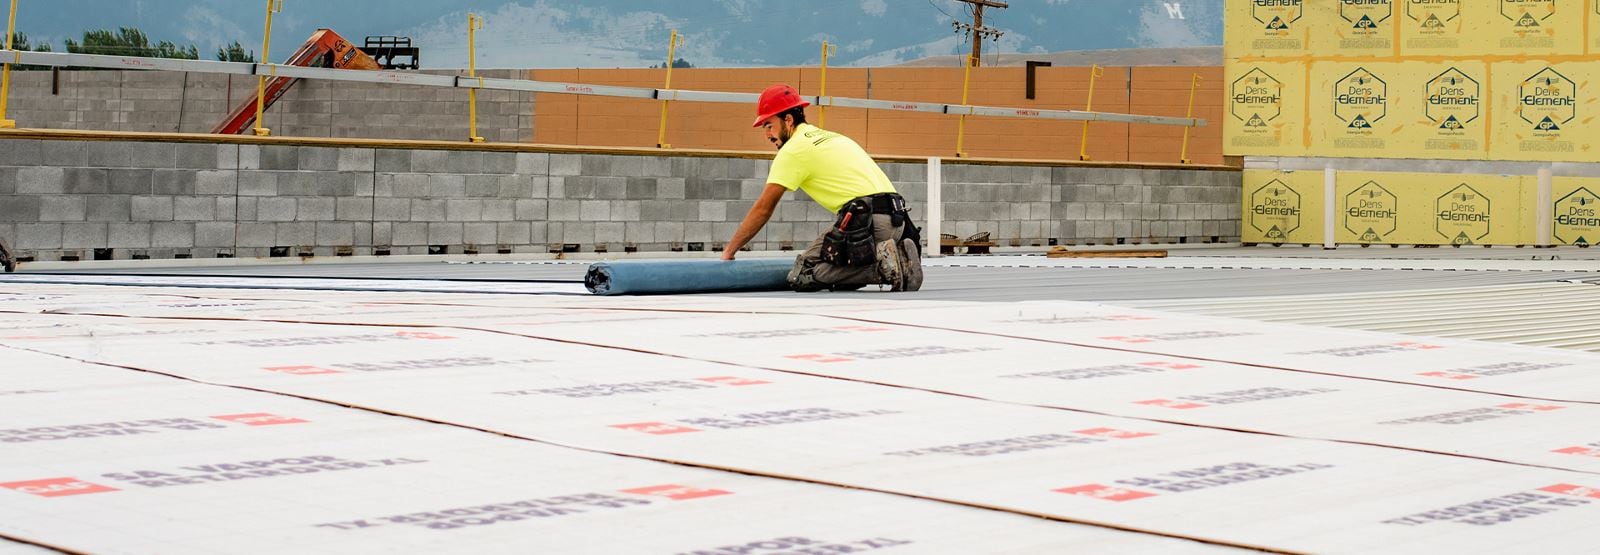 GAF certified contractors rolling out the new roof of Bozeman Public Safety Center in Montana